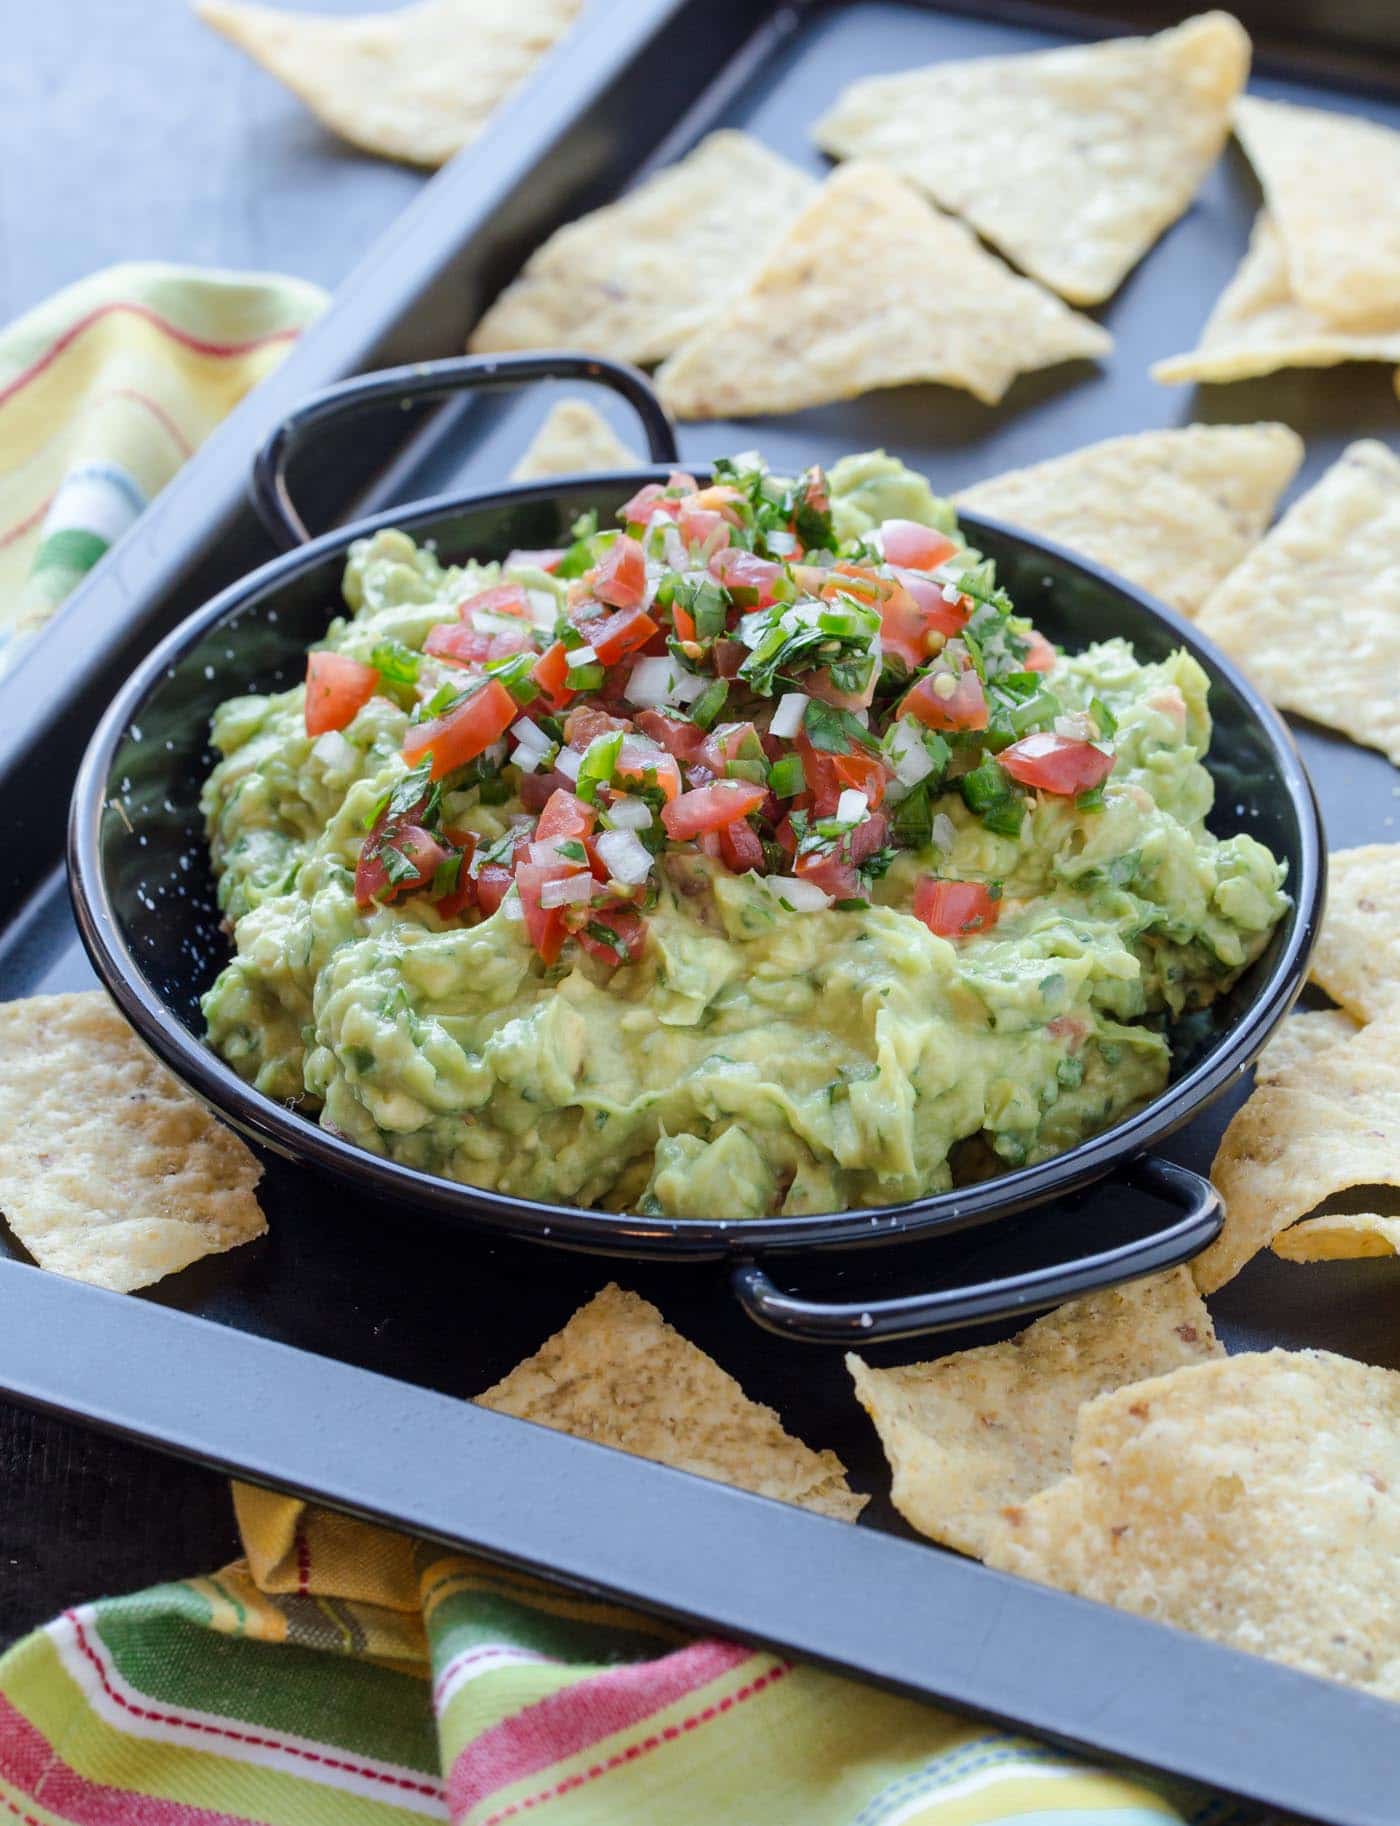 A plate of Guacamole and pico.